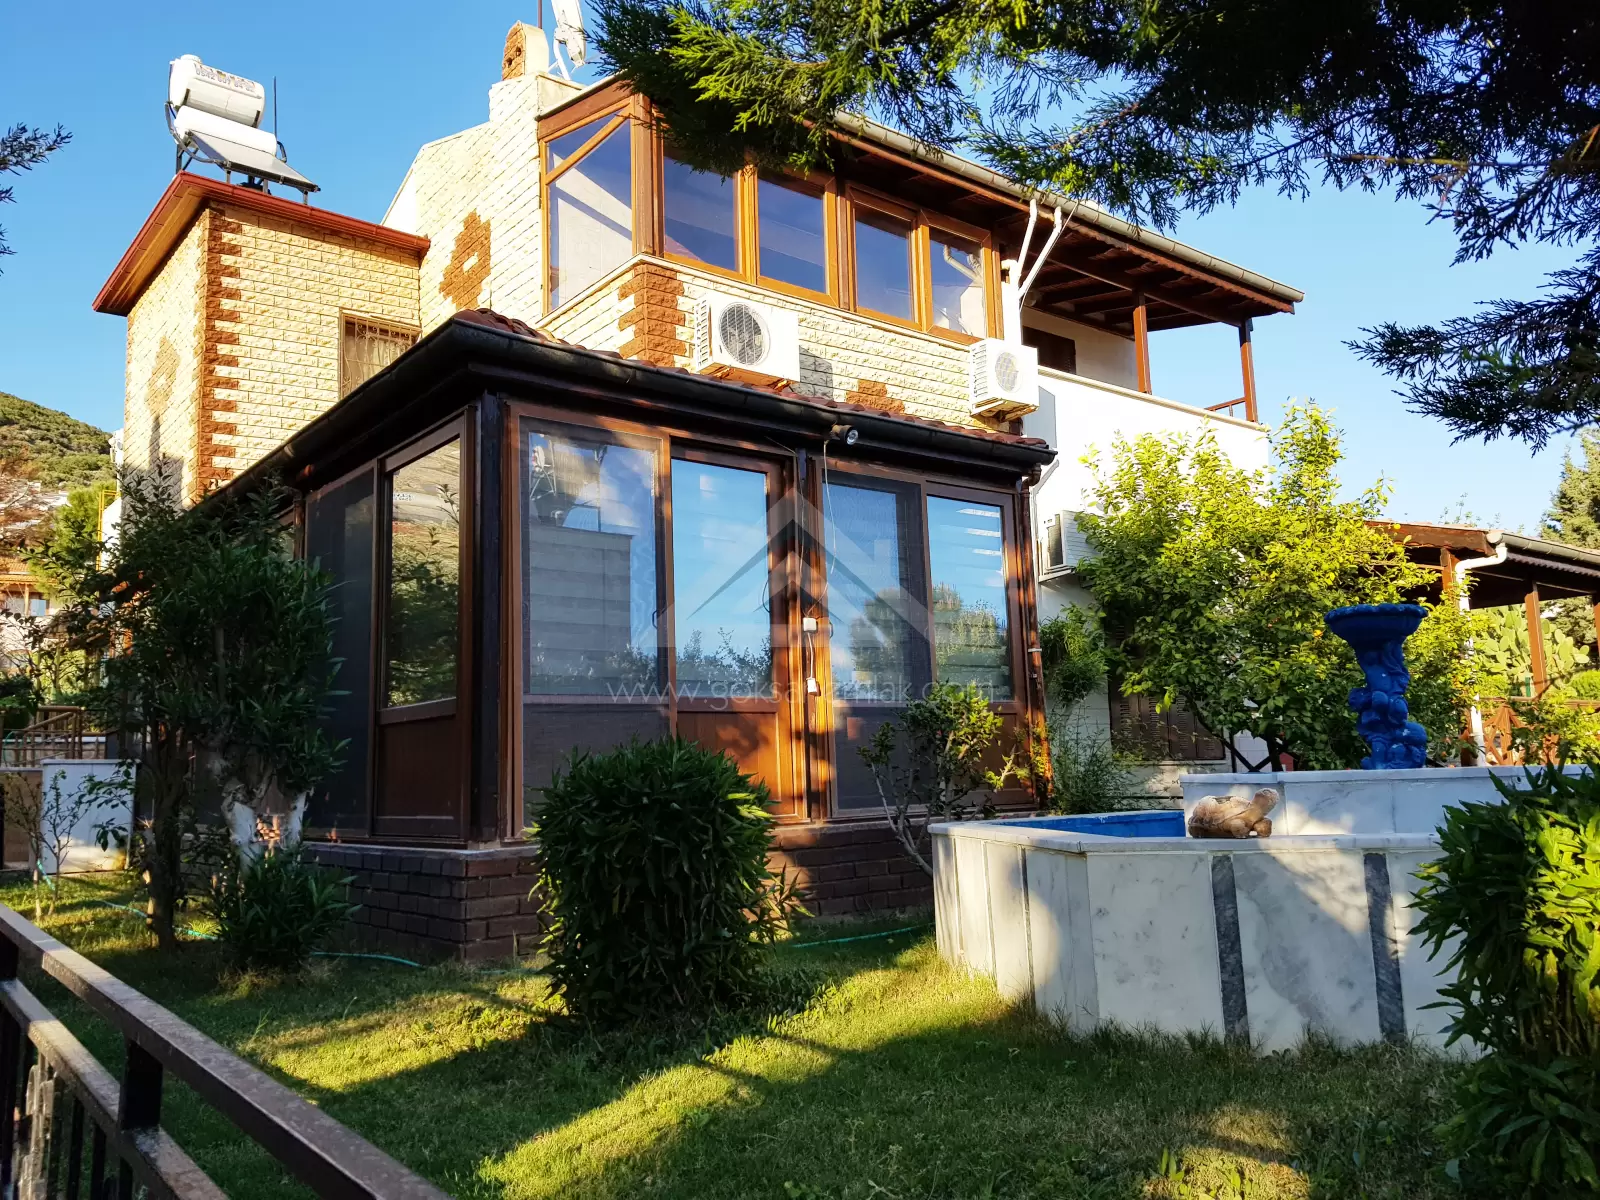 Duplex House For Sale İn Akbuk 350 Meters To The Sea Full Furnished